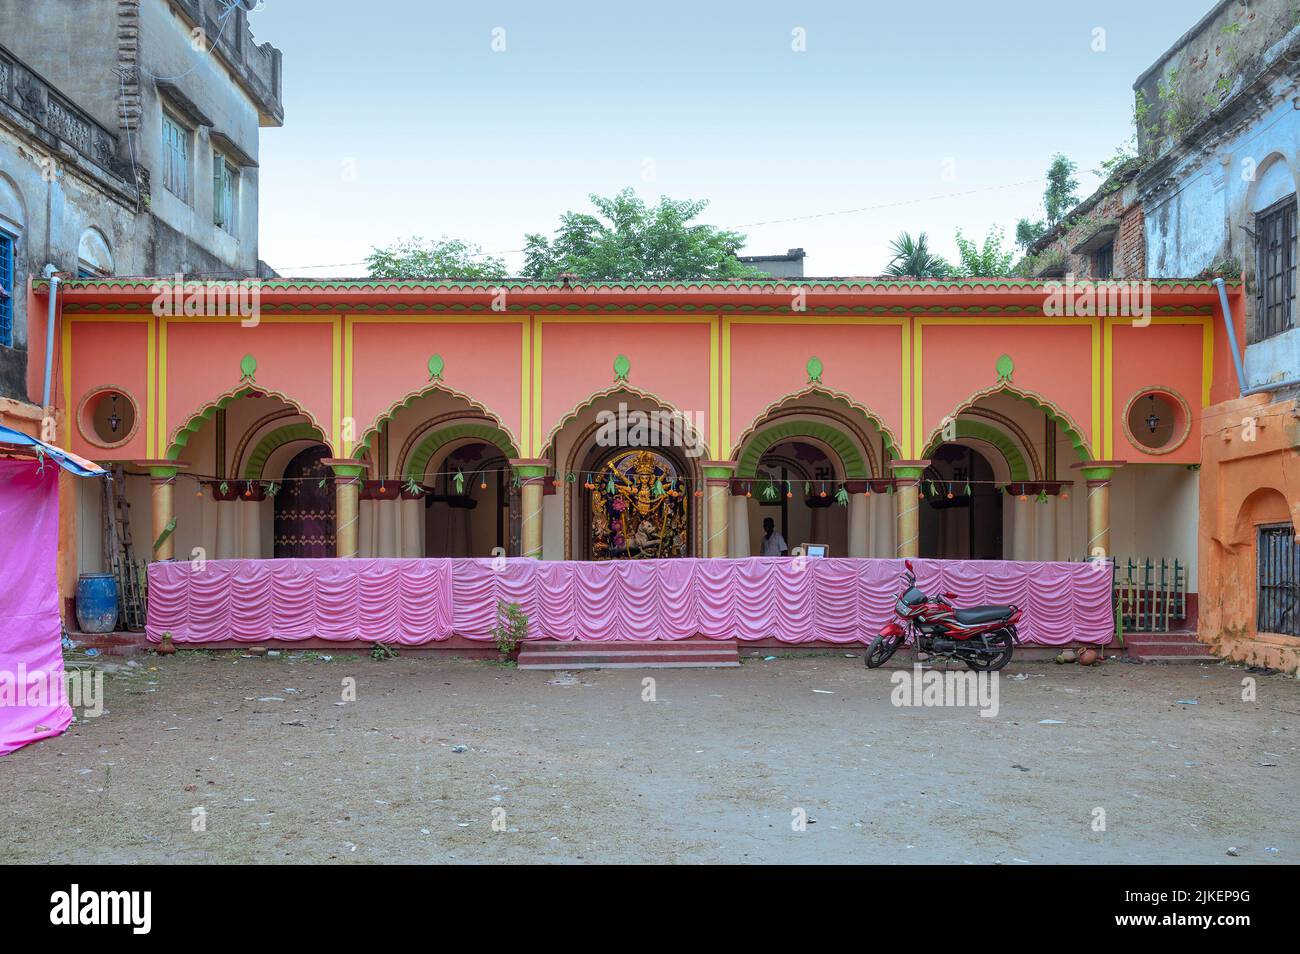 Howrah, India -October 26th, 2020 : Goddess Durga being worshipped inside old age decorated home. Durga Puja pandal, biggest festival of Hinduism. Stock Photo